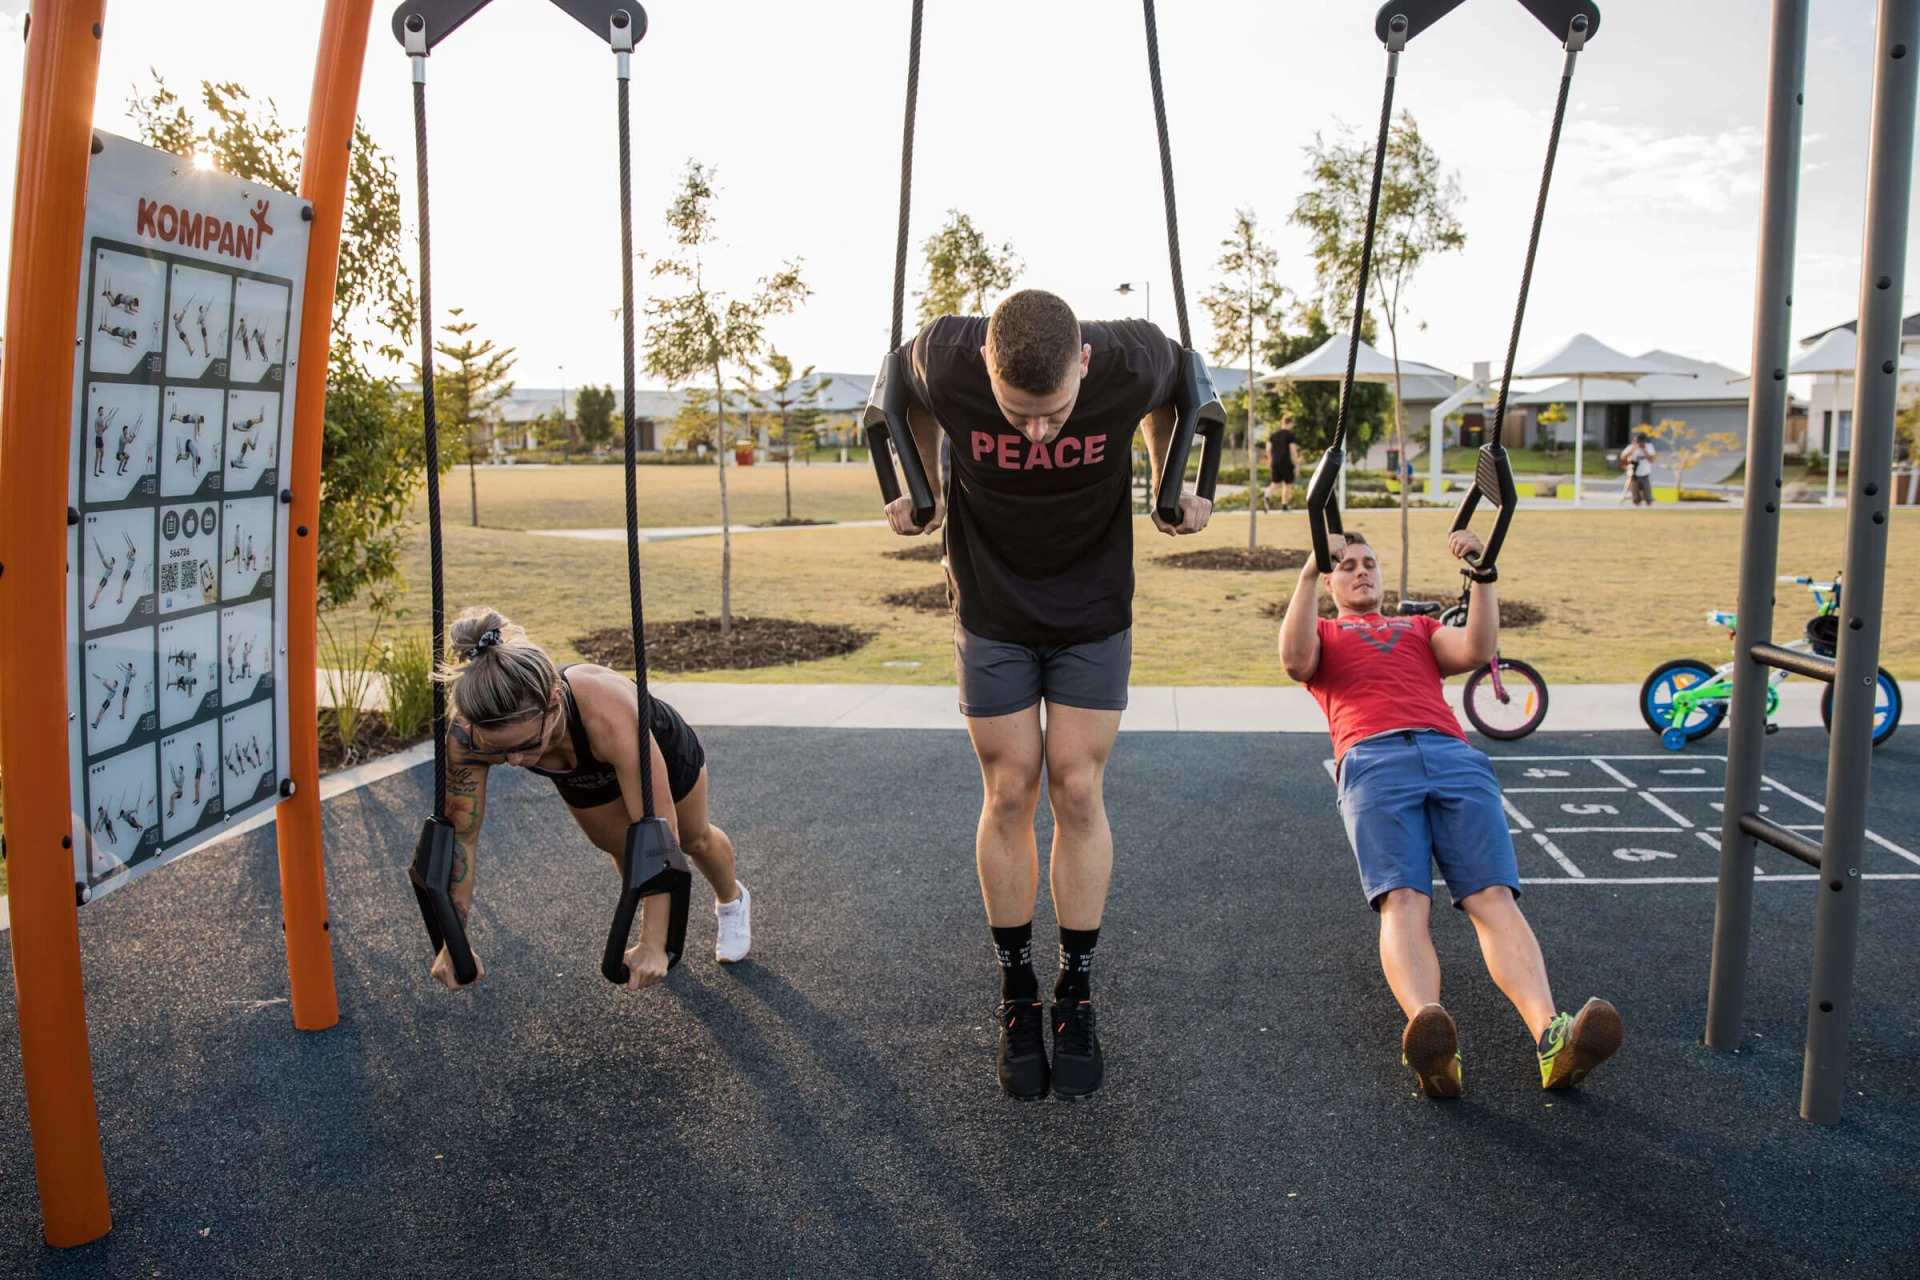 Three people working out on the suspension trainer at Capestone outdoor gym